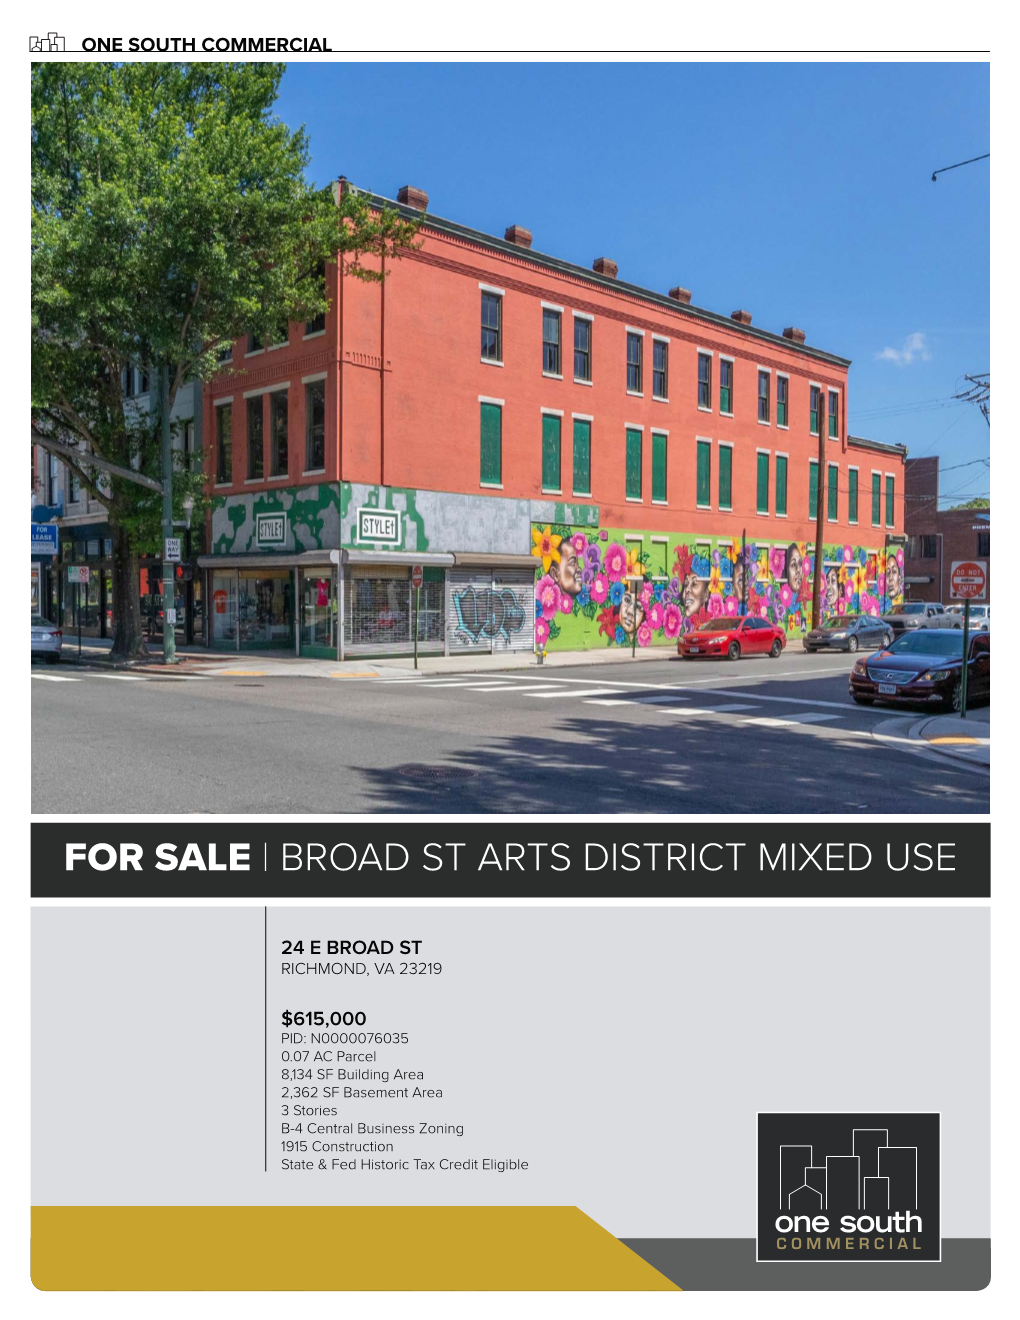 For Sale | Broad St Arts District Mixed Use